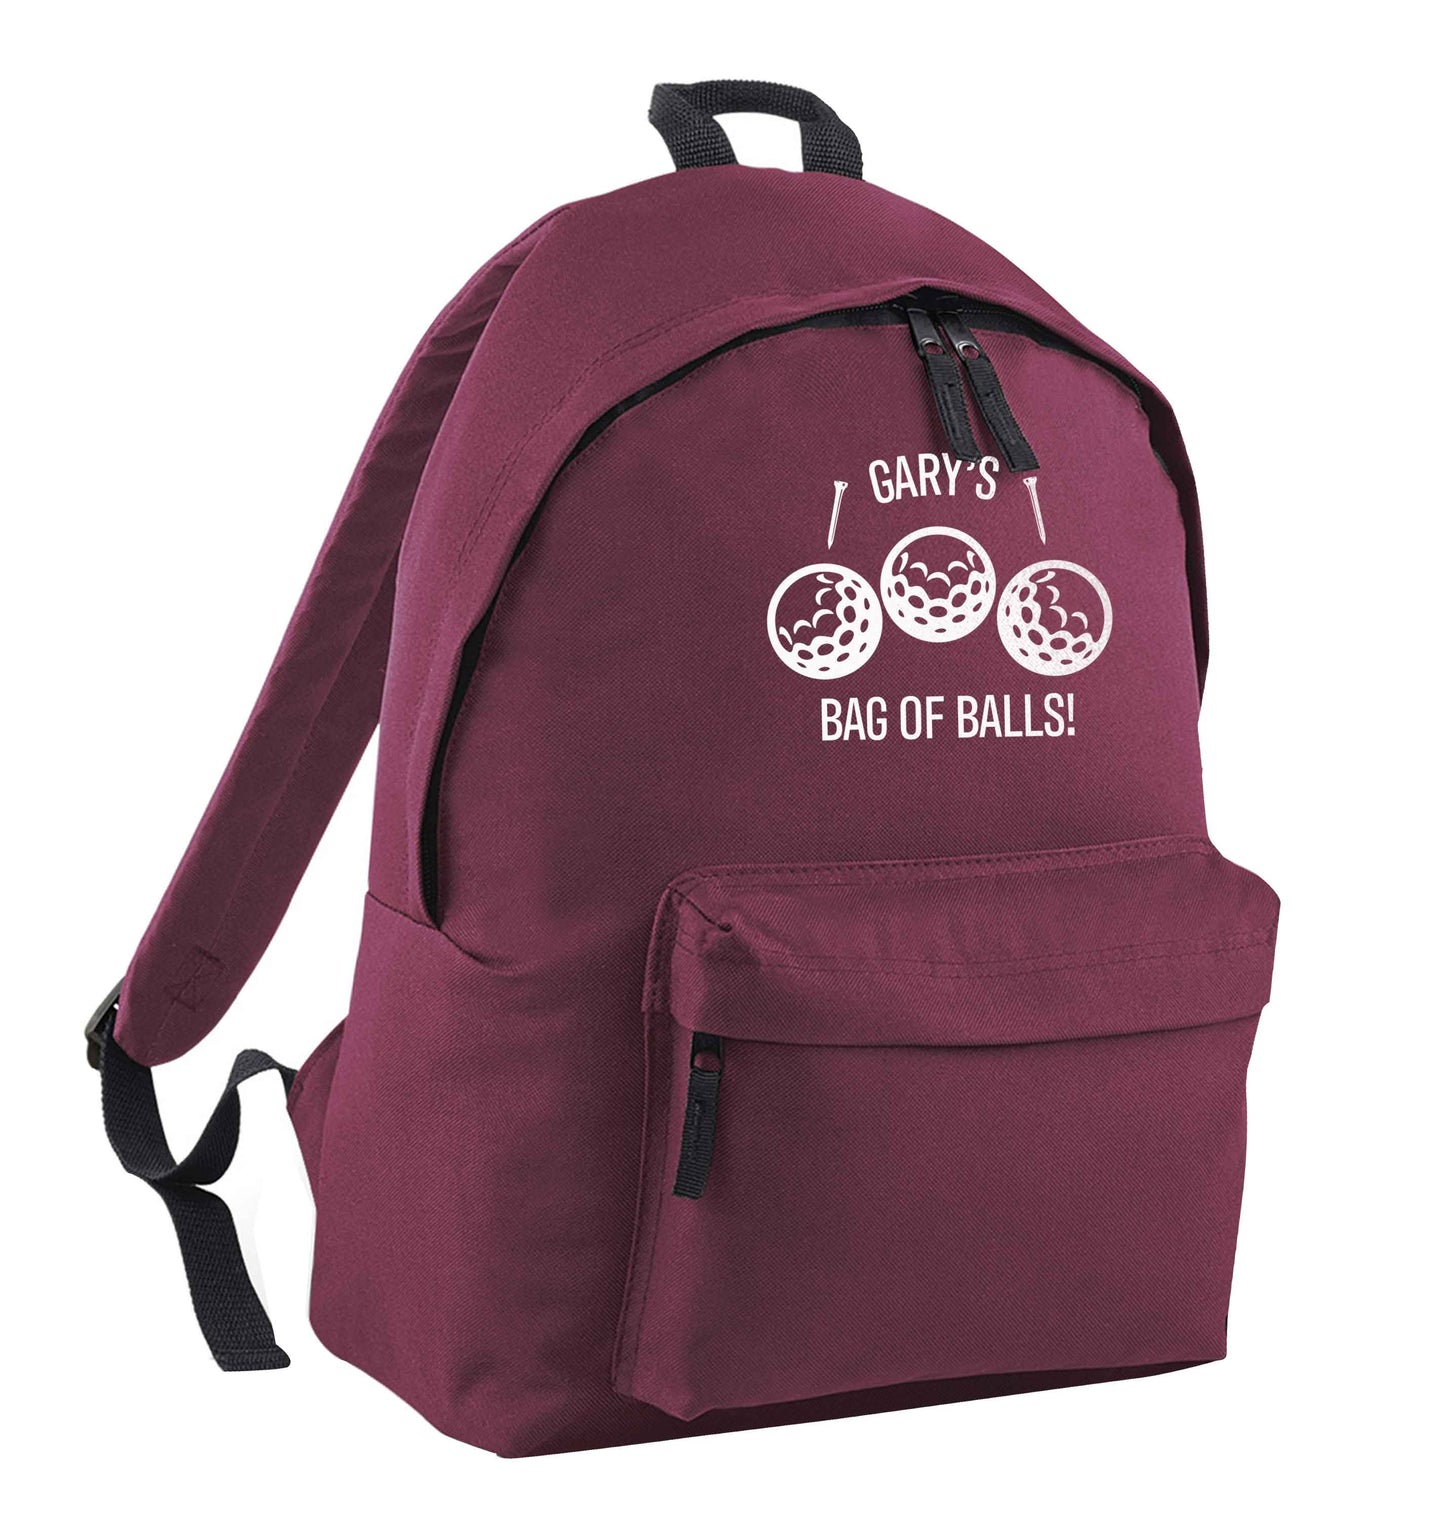 Personalised bag of golf balls maroon adults backpack